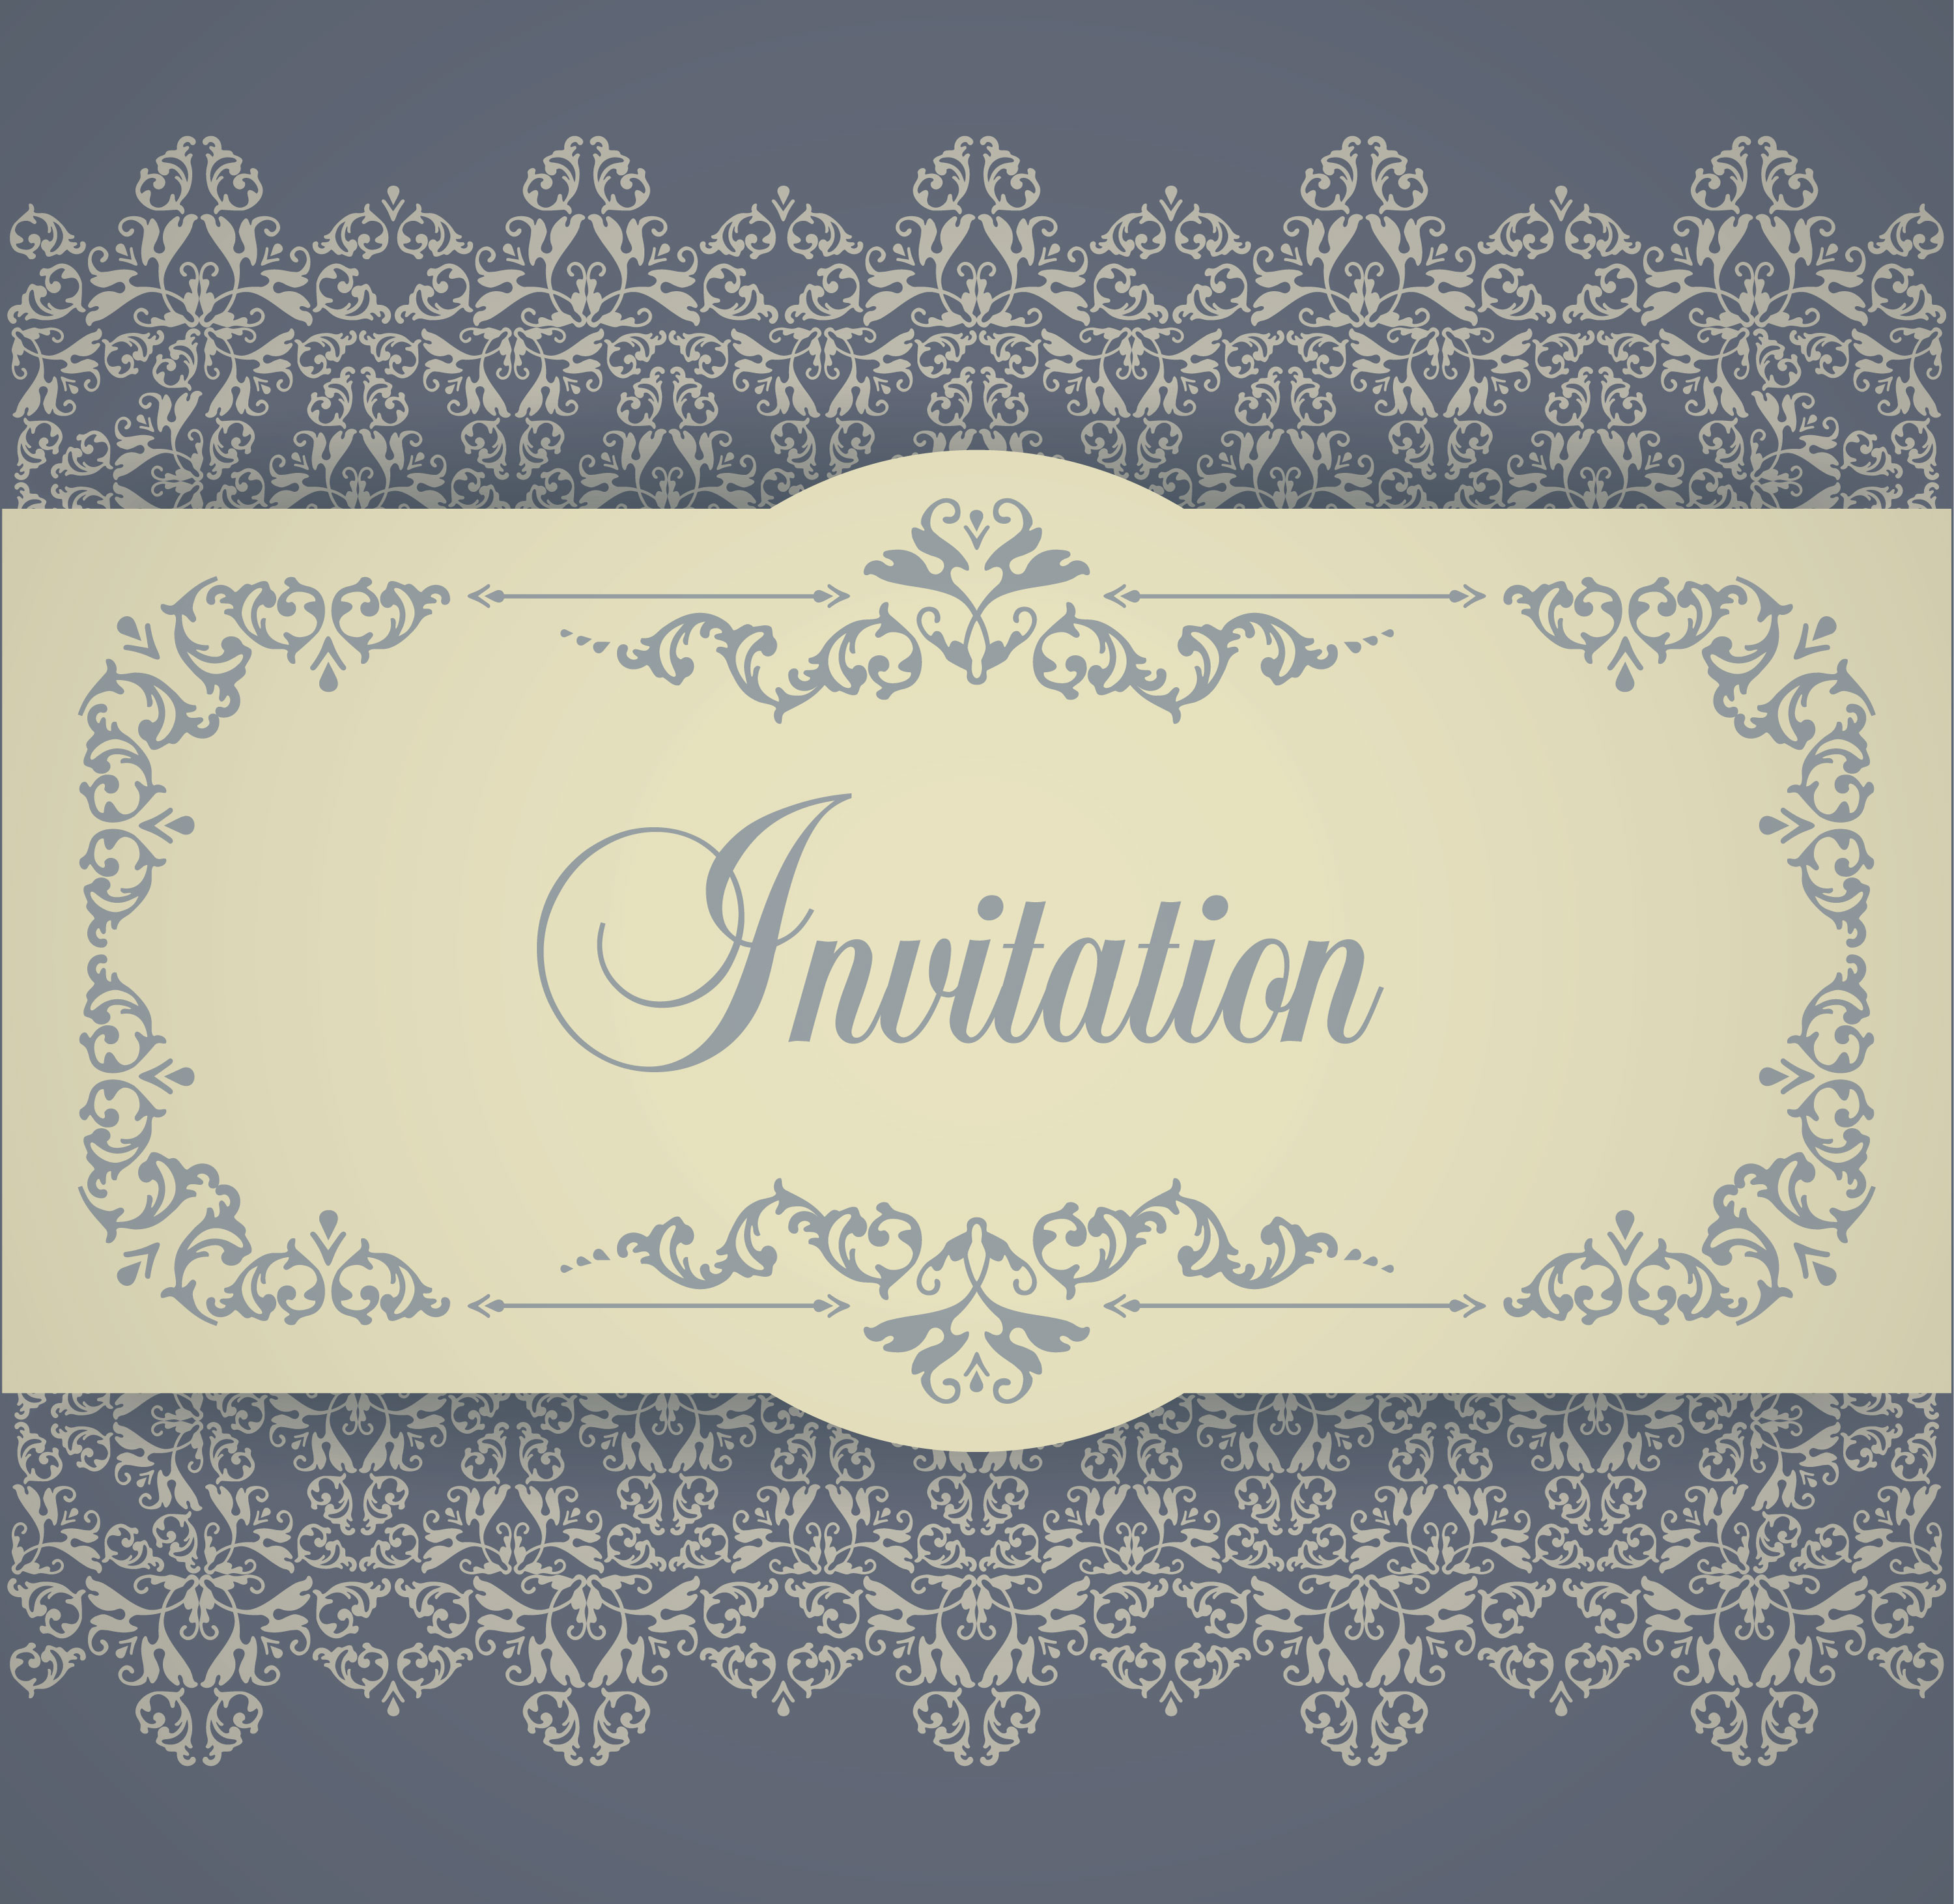 Design template in vintage style Photoshop brush